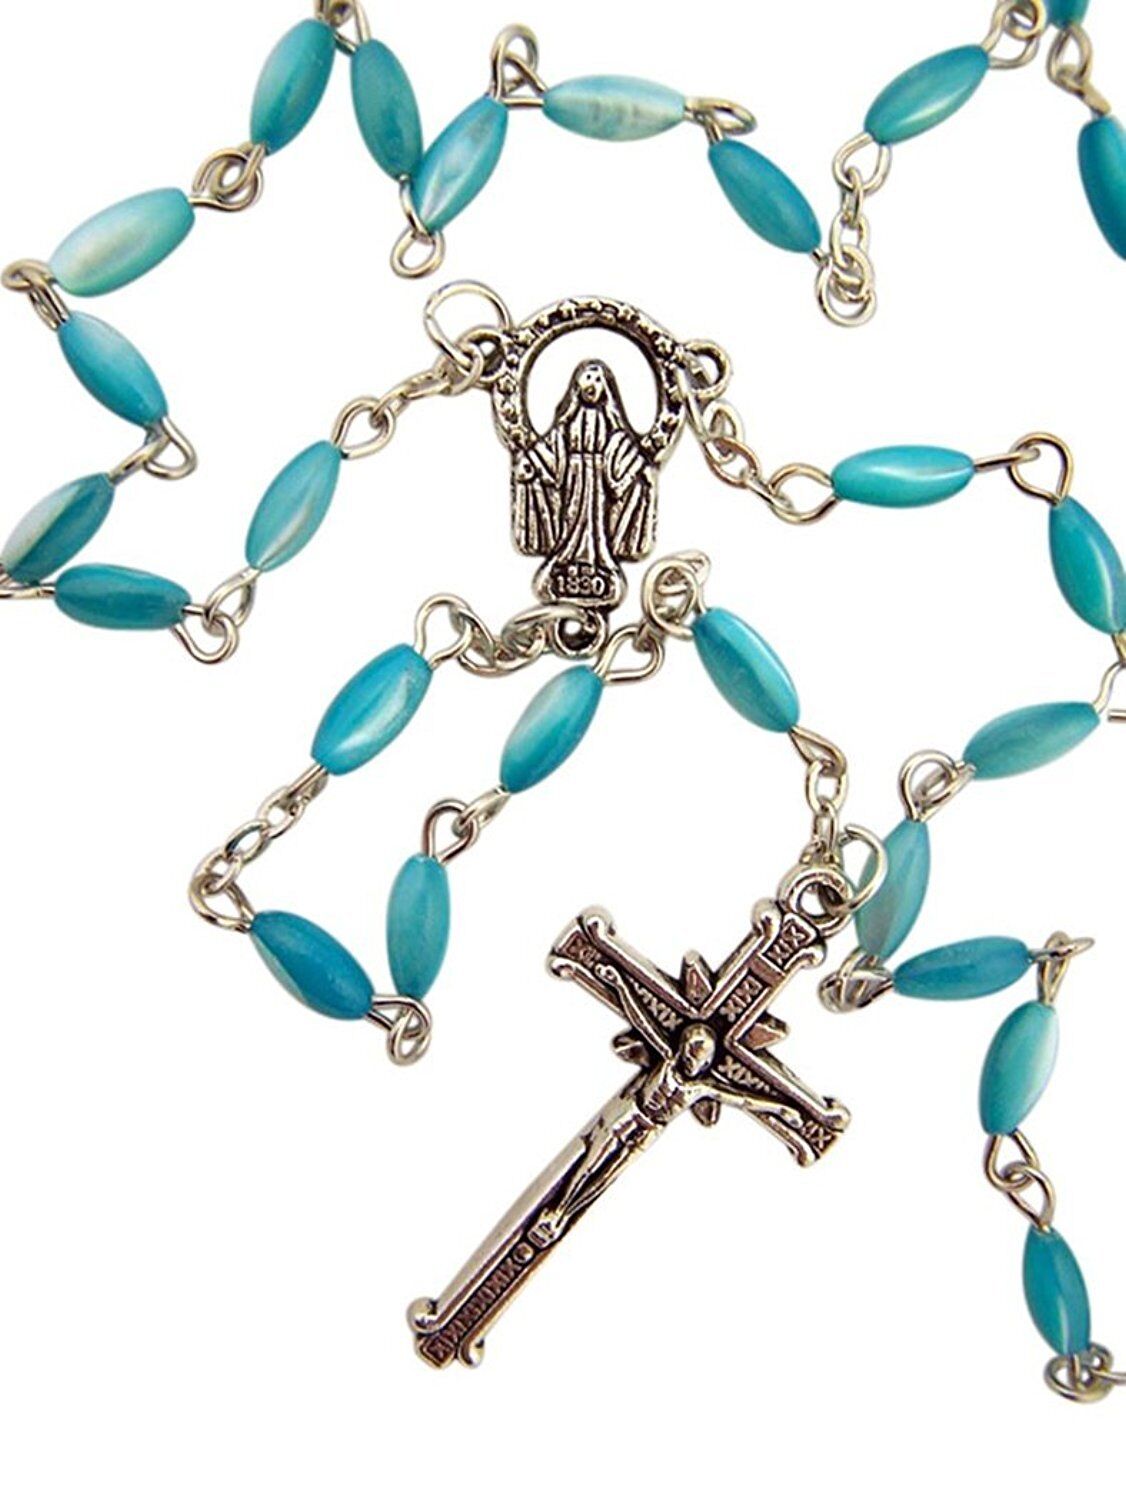 Light Blue Imitation Simulated Pearlescent Glass Bead Our Lady of Grace Rosary